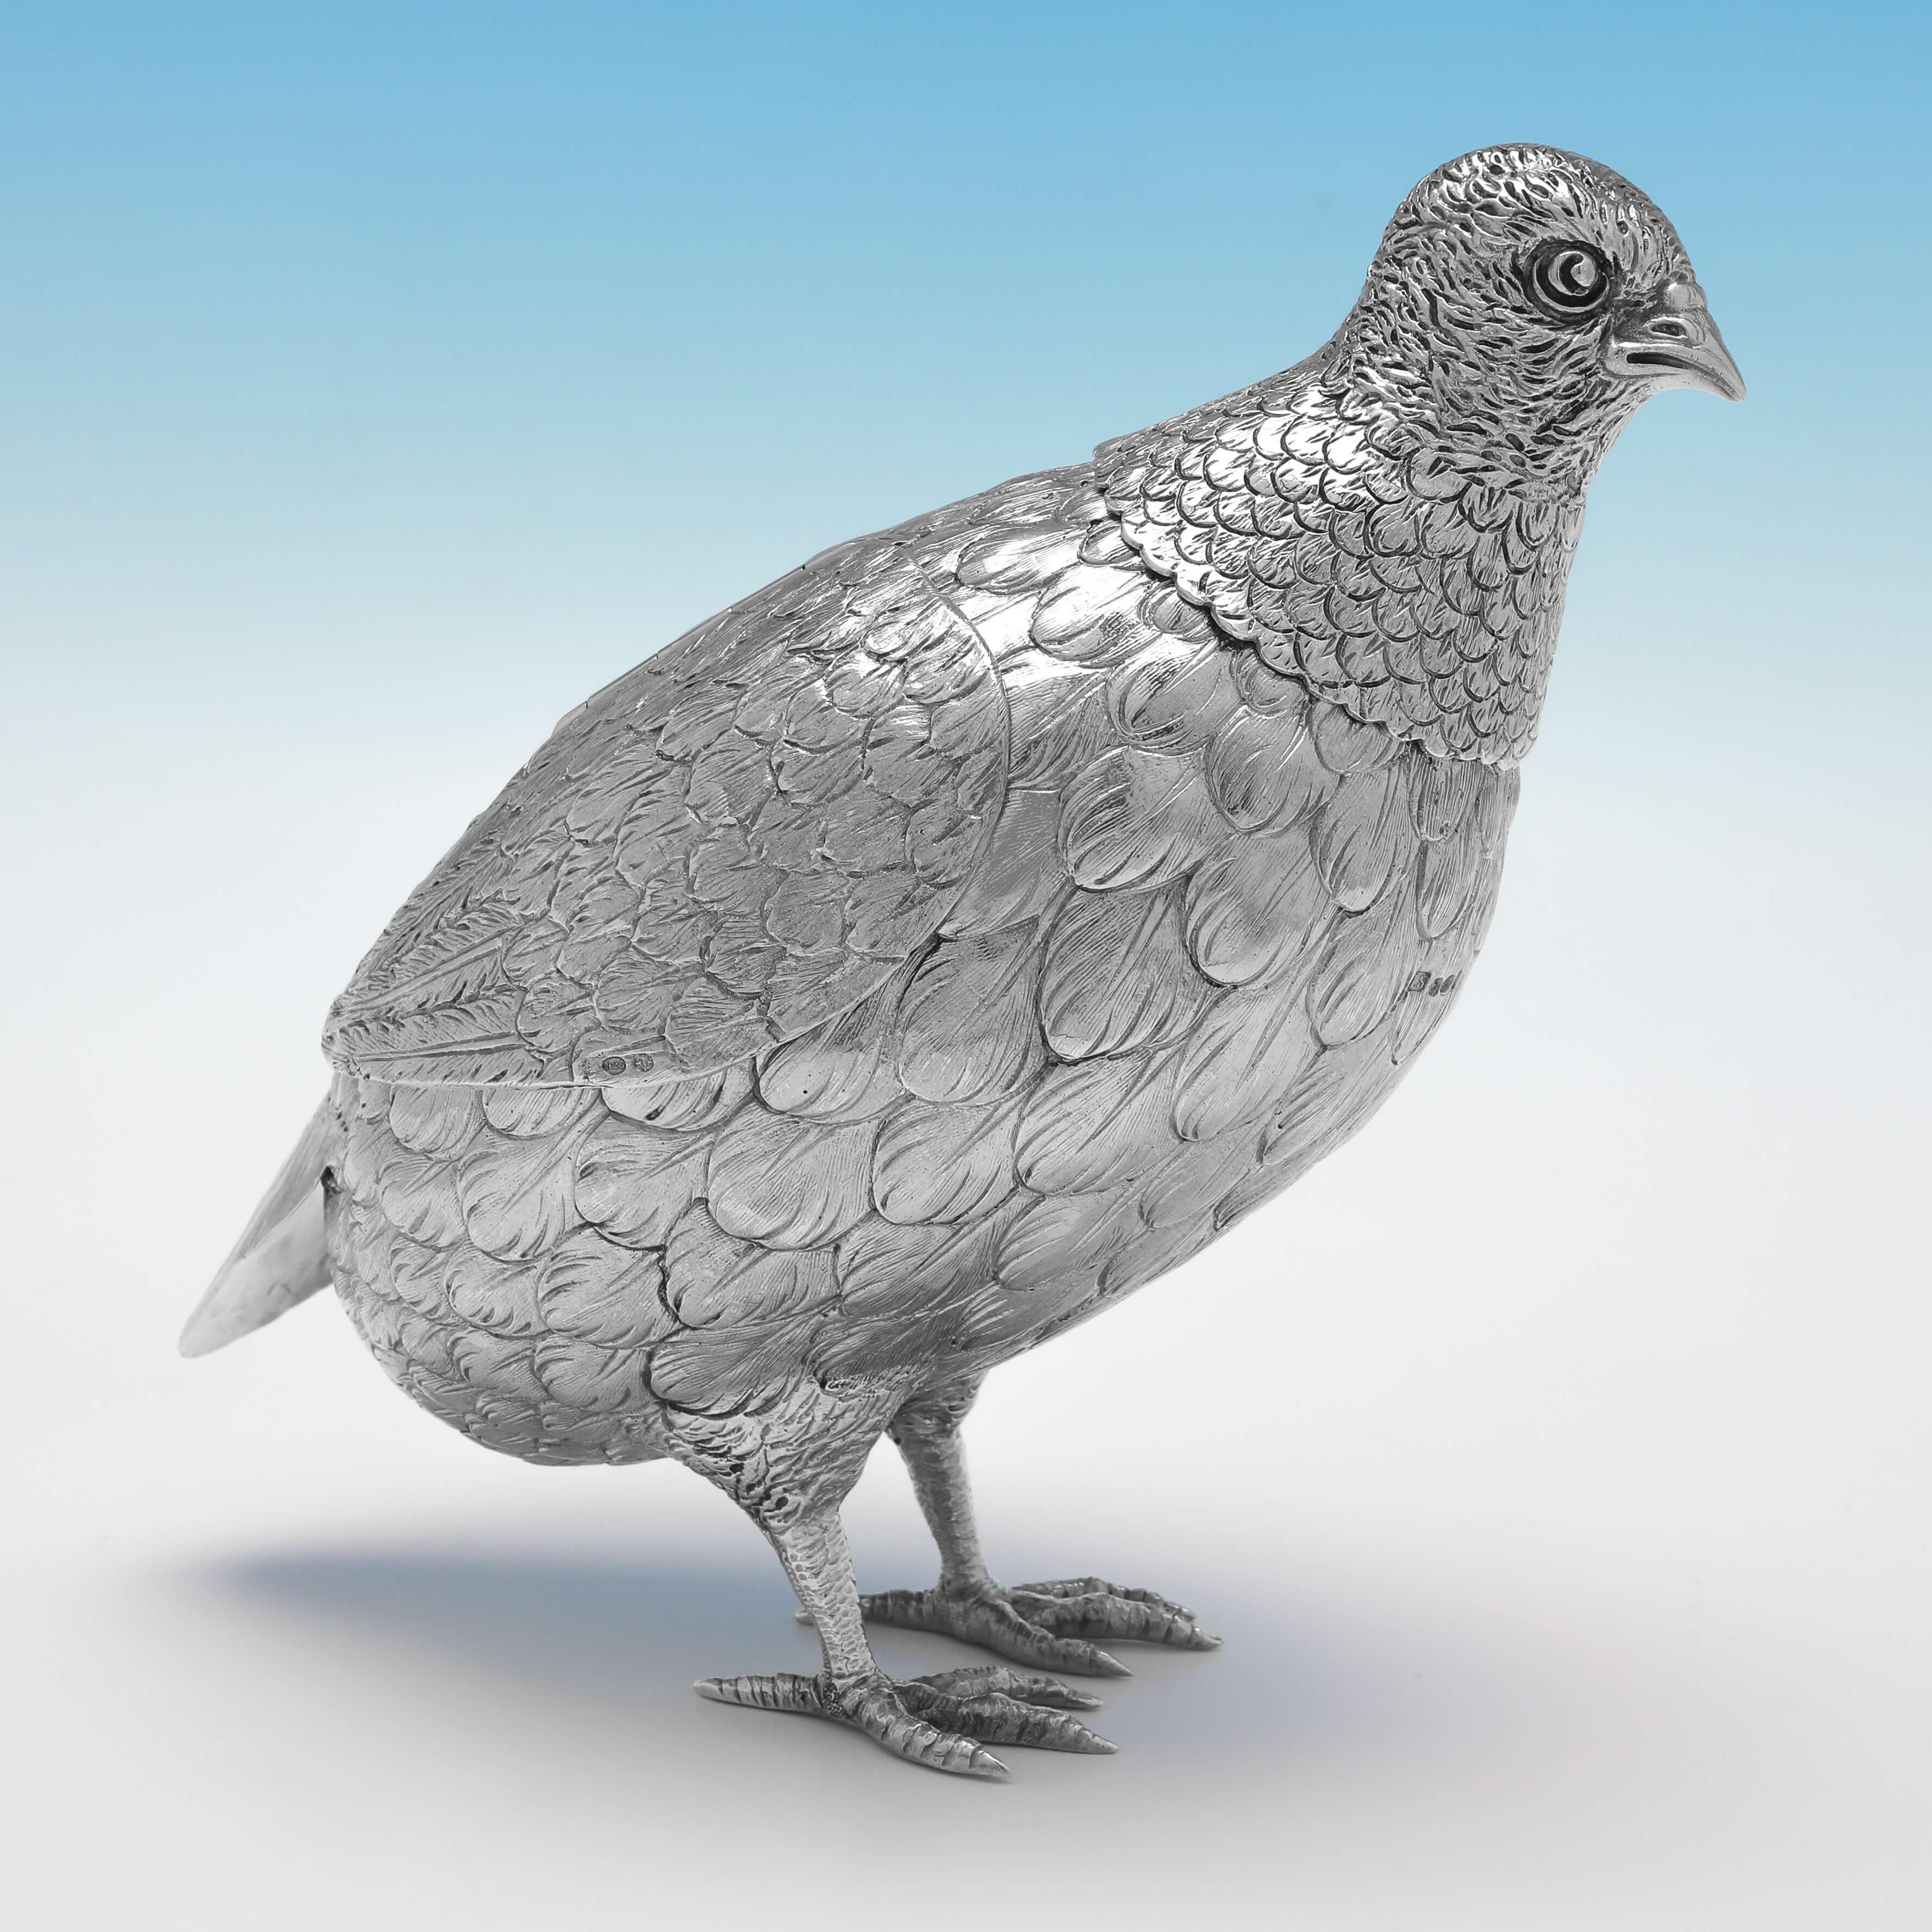 Carrying import marks for London in 1897 by Berthold Muller, and London in 1925 by Israel Segalov, this charming, matched pair of Sterling Silver Models of Partridges, are handsomely made. 

Each partridge measures 6.25